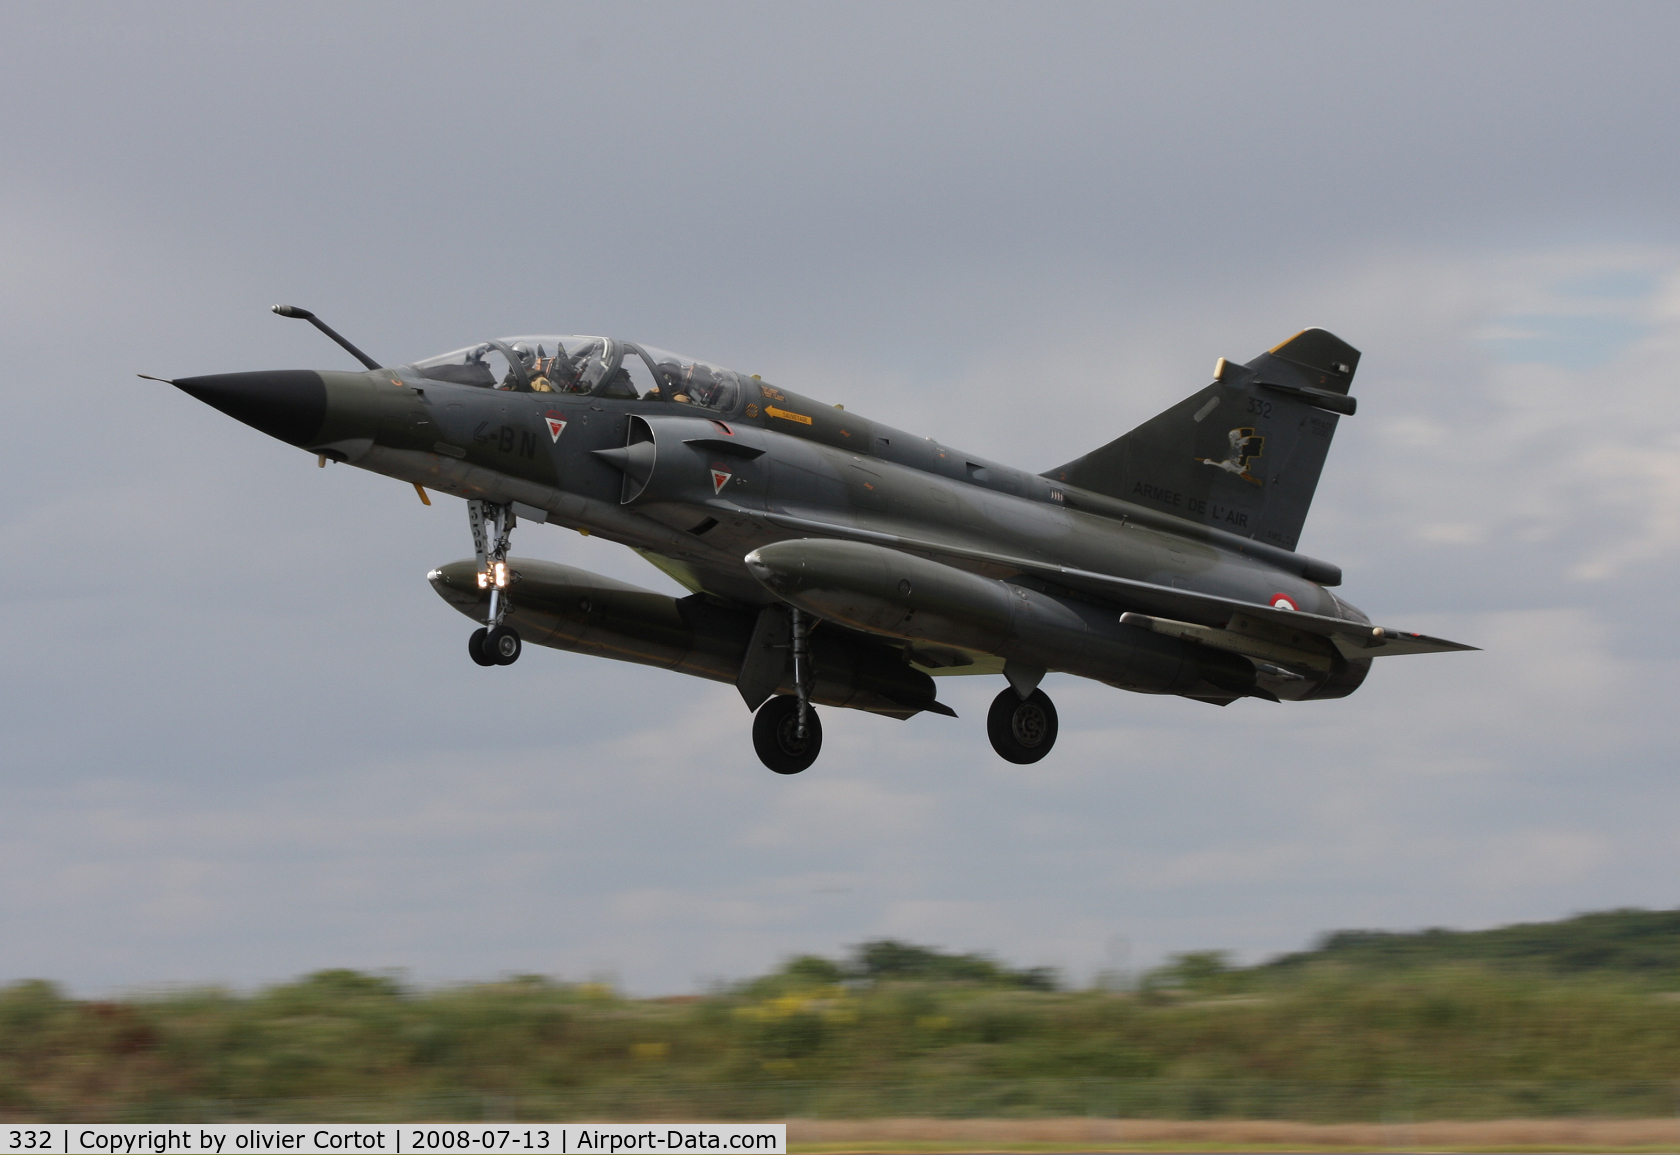 332, Dassault Mirage 2000N C/N Not found 332, landing after the display at Avord airshow